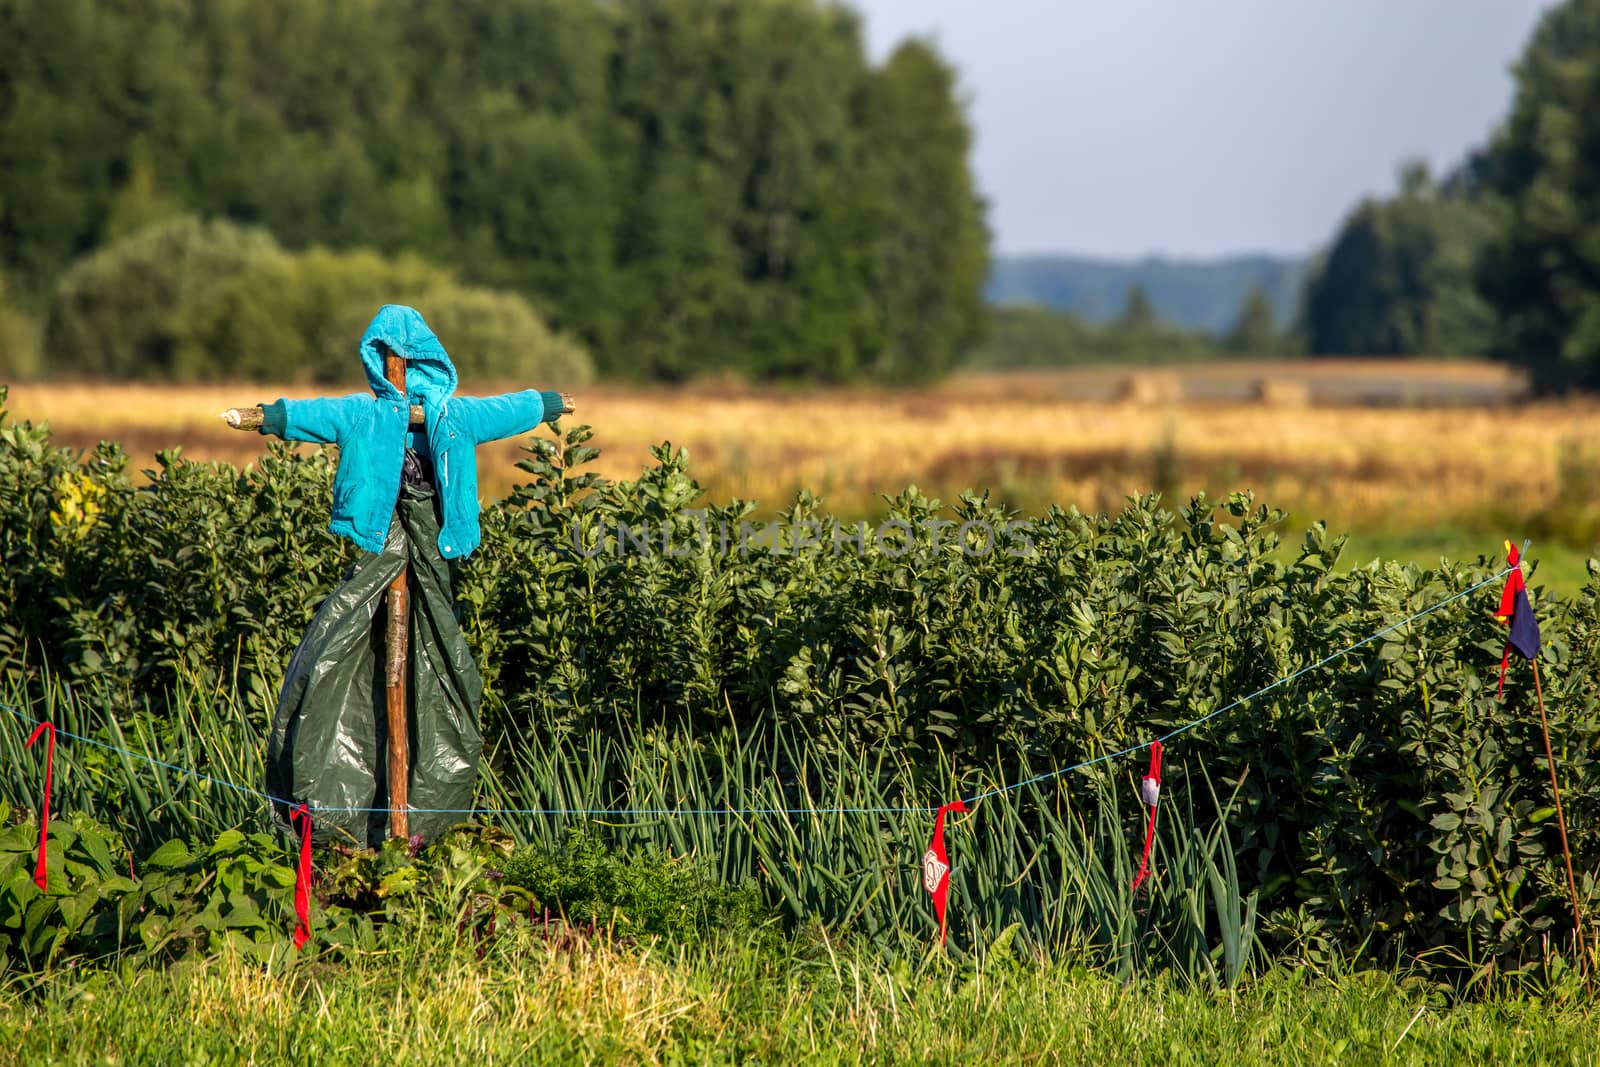 Scarecrow in vegetable garden on summer time, Latvia. Scarecrow is an object made to resemble a human figure, set up to scare birds away from a field where crops are growing.

